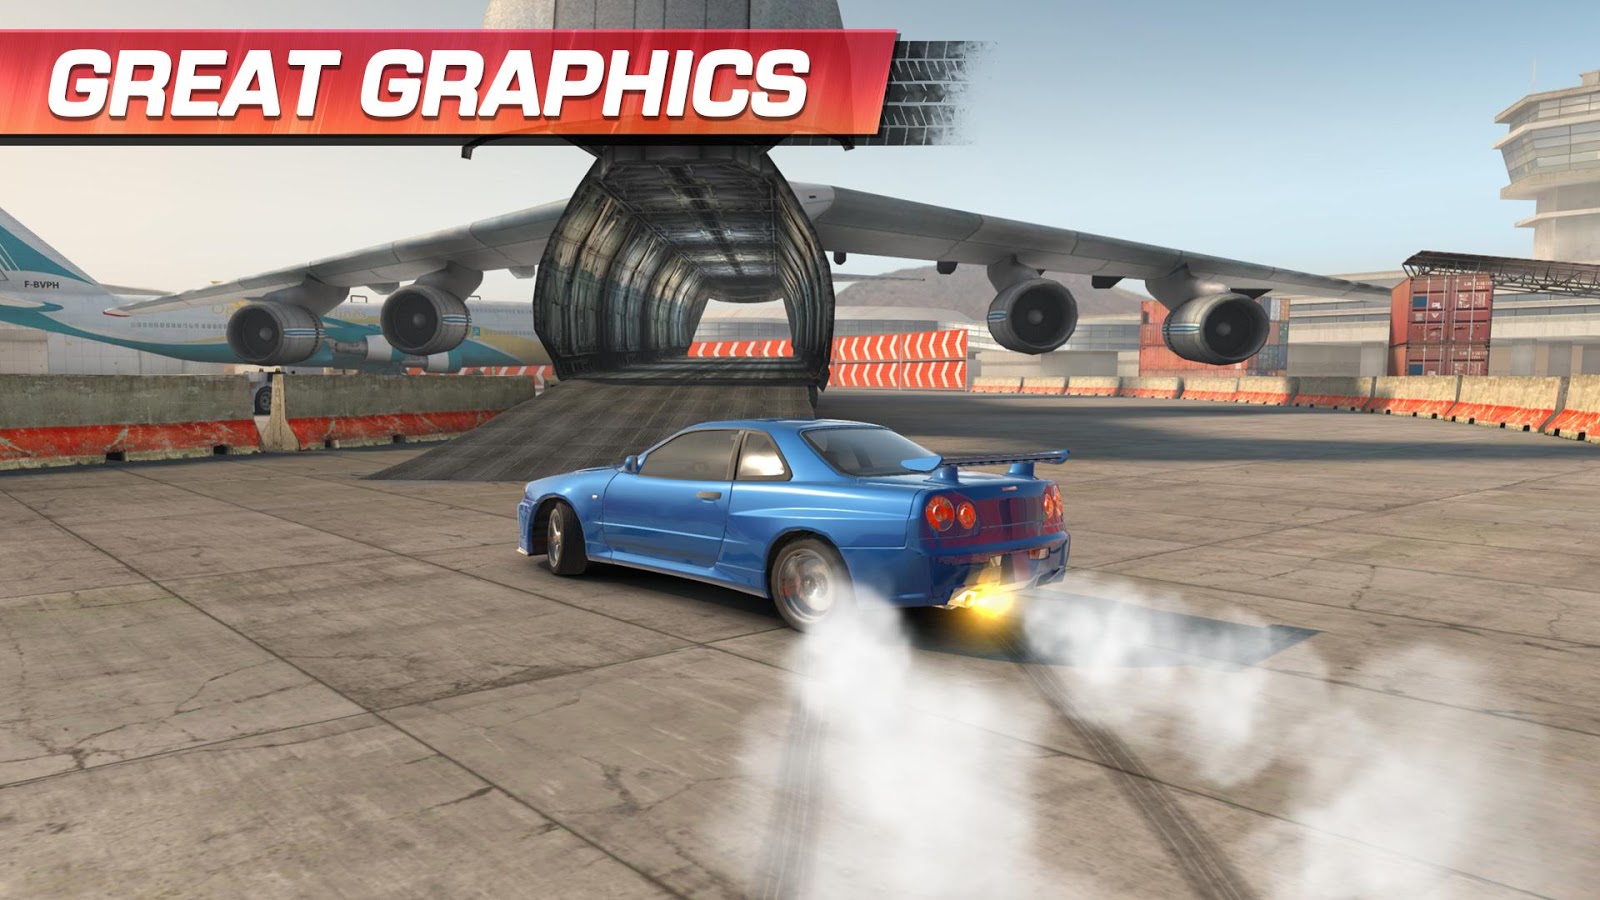 Amazing CarX Drift Racing Pictures & Backgrounds